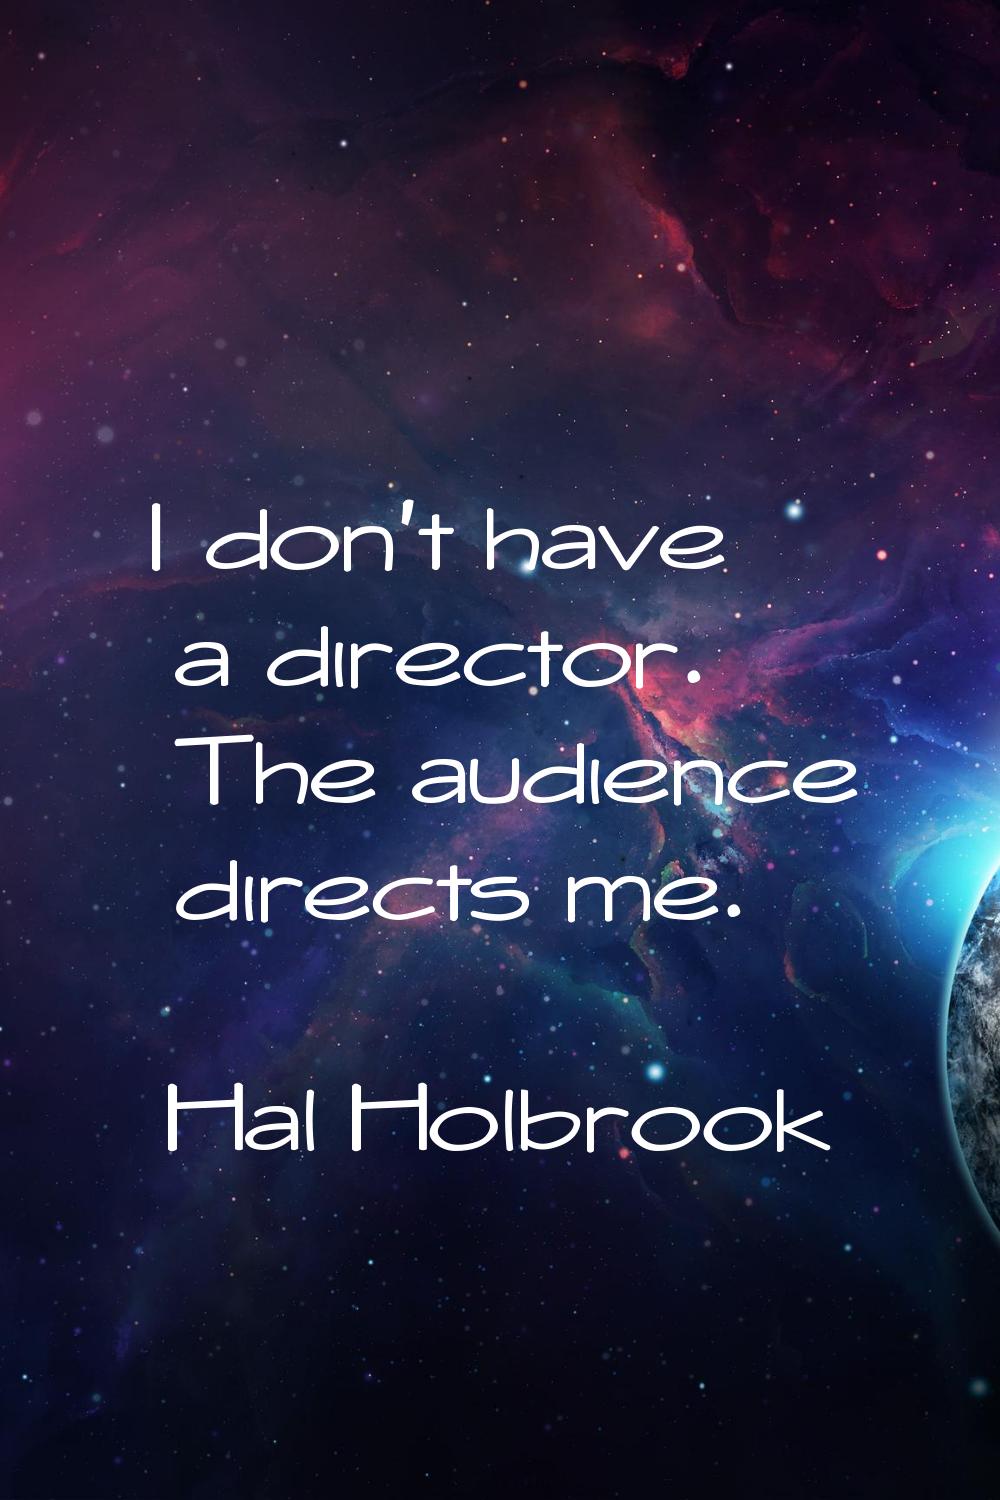 I don't have a director. The audience directs me.